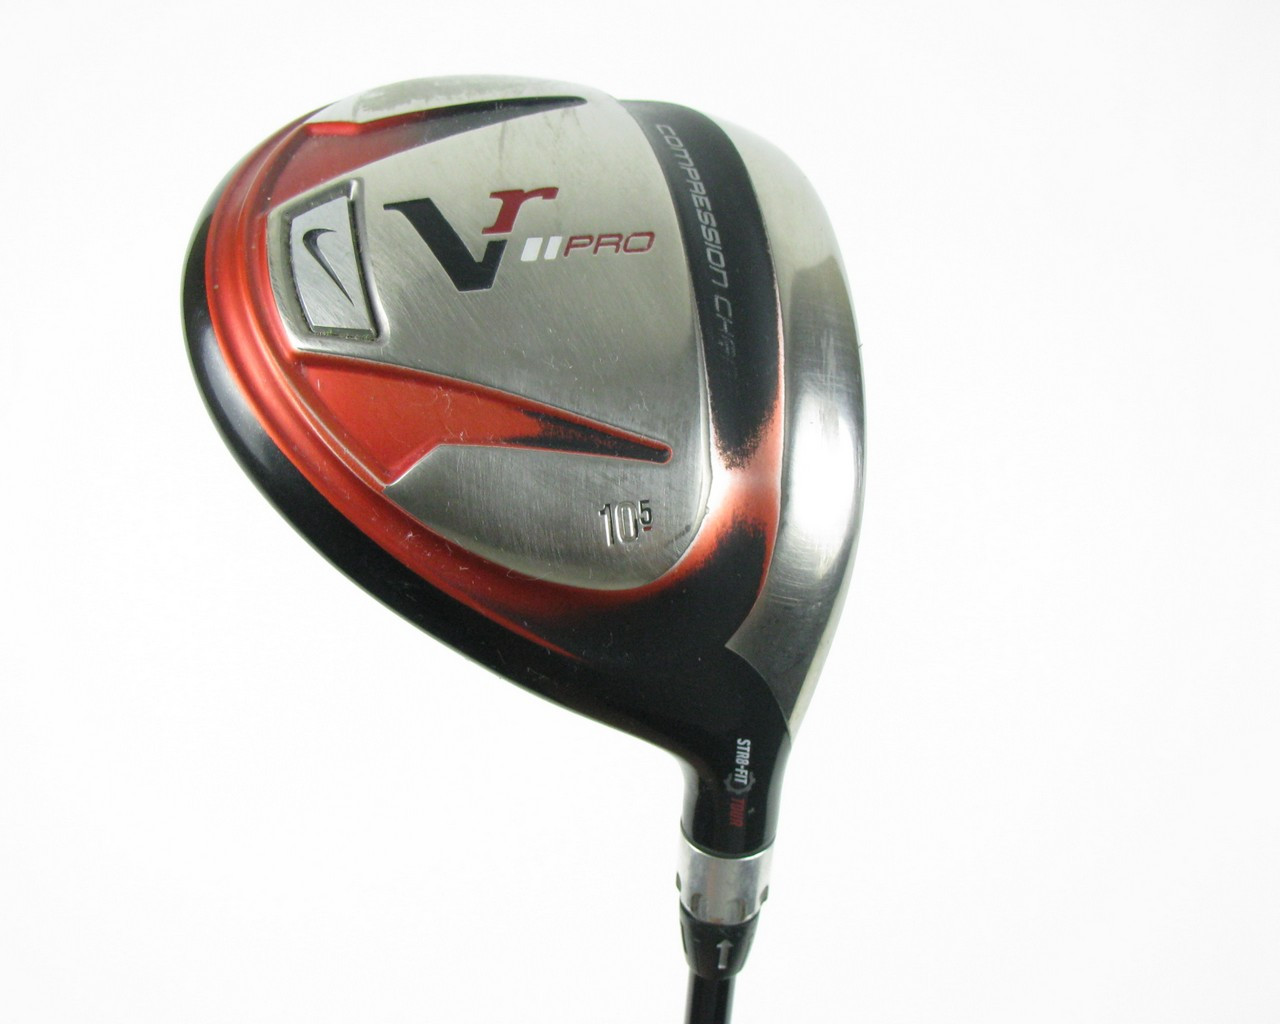 Nike VR PRO STR8-FIT Tour Driver 10.5 degree w/ Aldila Voodoo SVR6 Stiff  (Out of Stock) - Clubs n Covers Golf